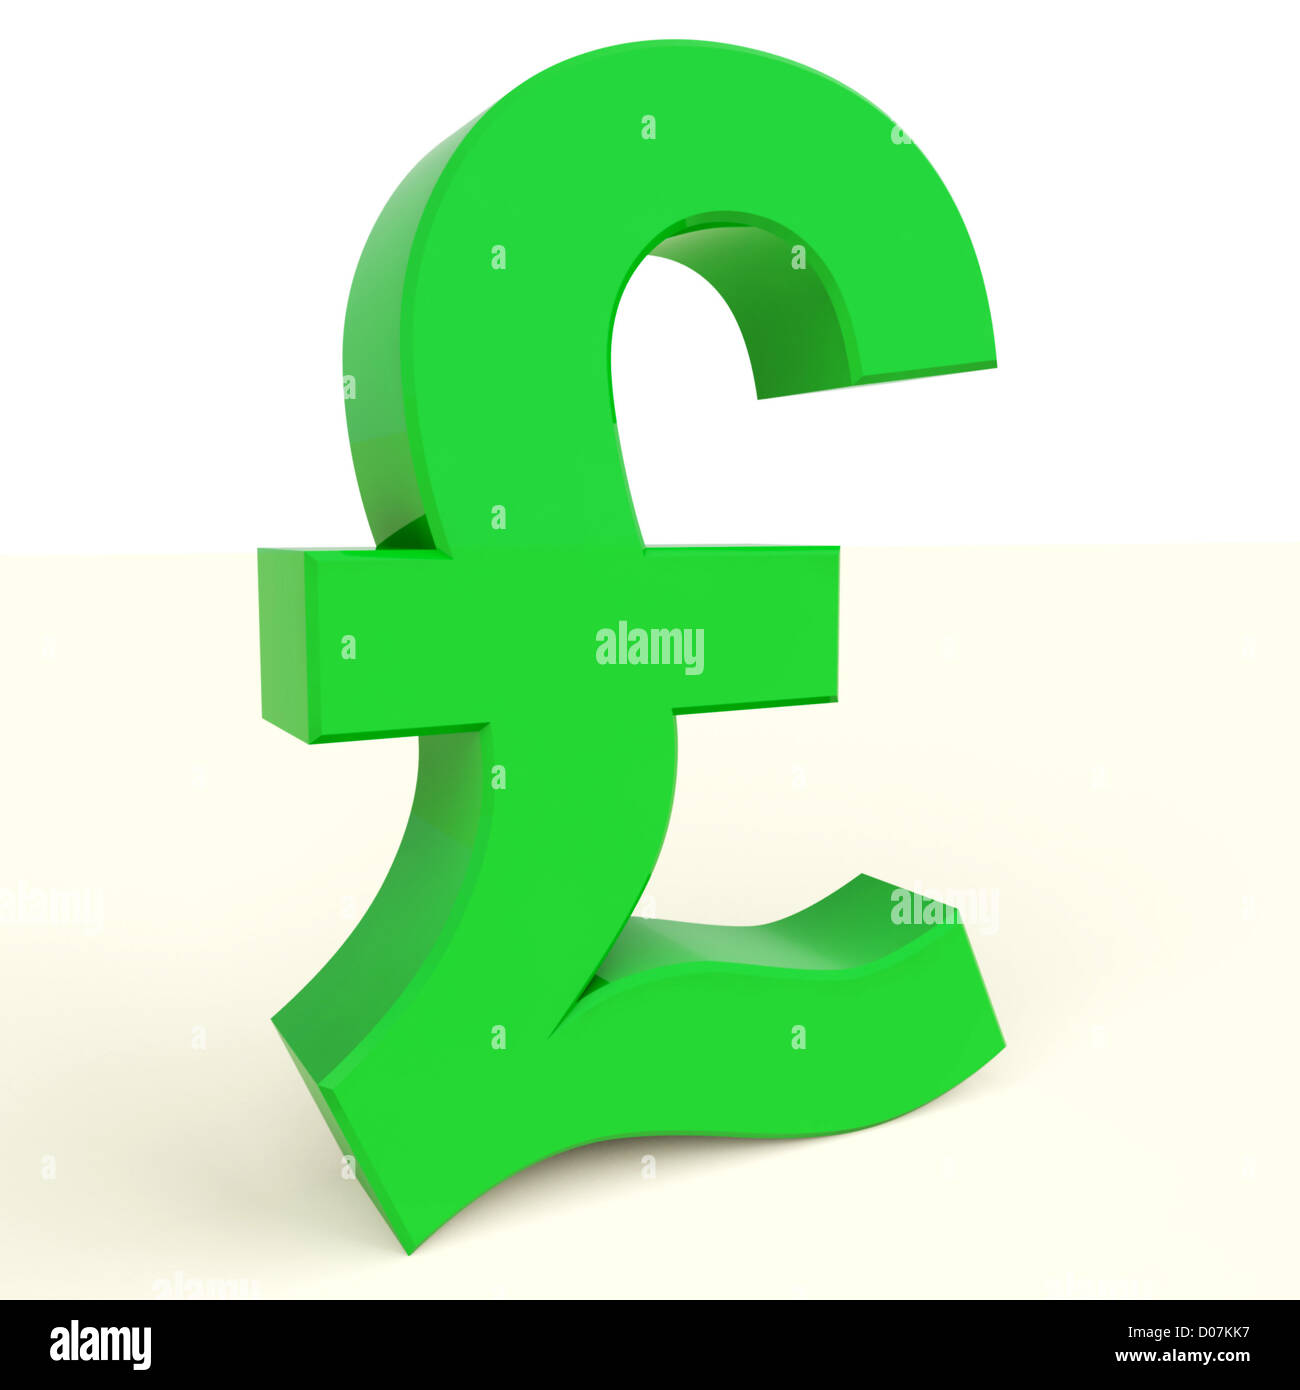 Pound Symbol For Money And Investments In England Stock Photo